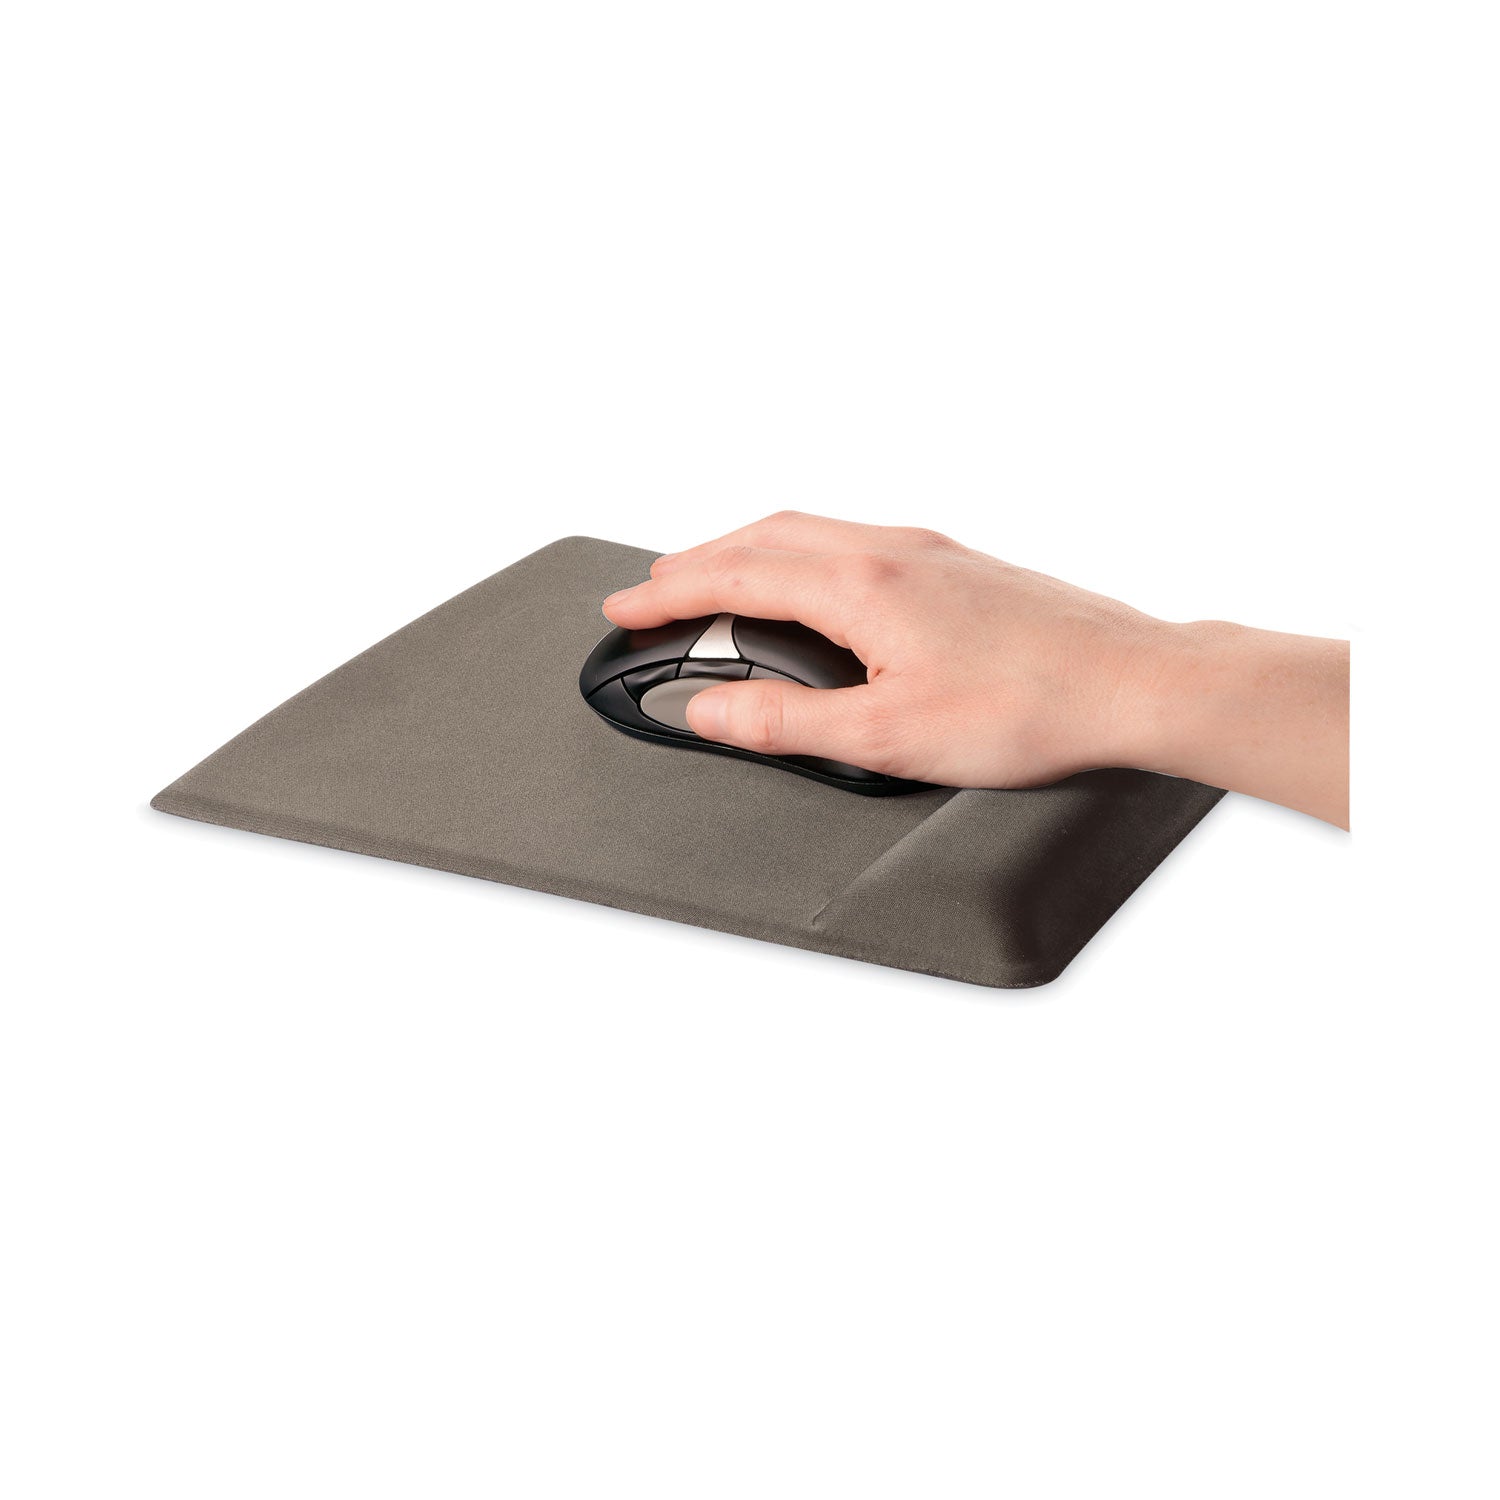 Ergonomic Memory Foam Wrist Rest with Attached Mouse Pad, 8.25 x 9.87, Black - 